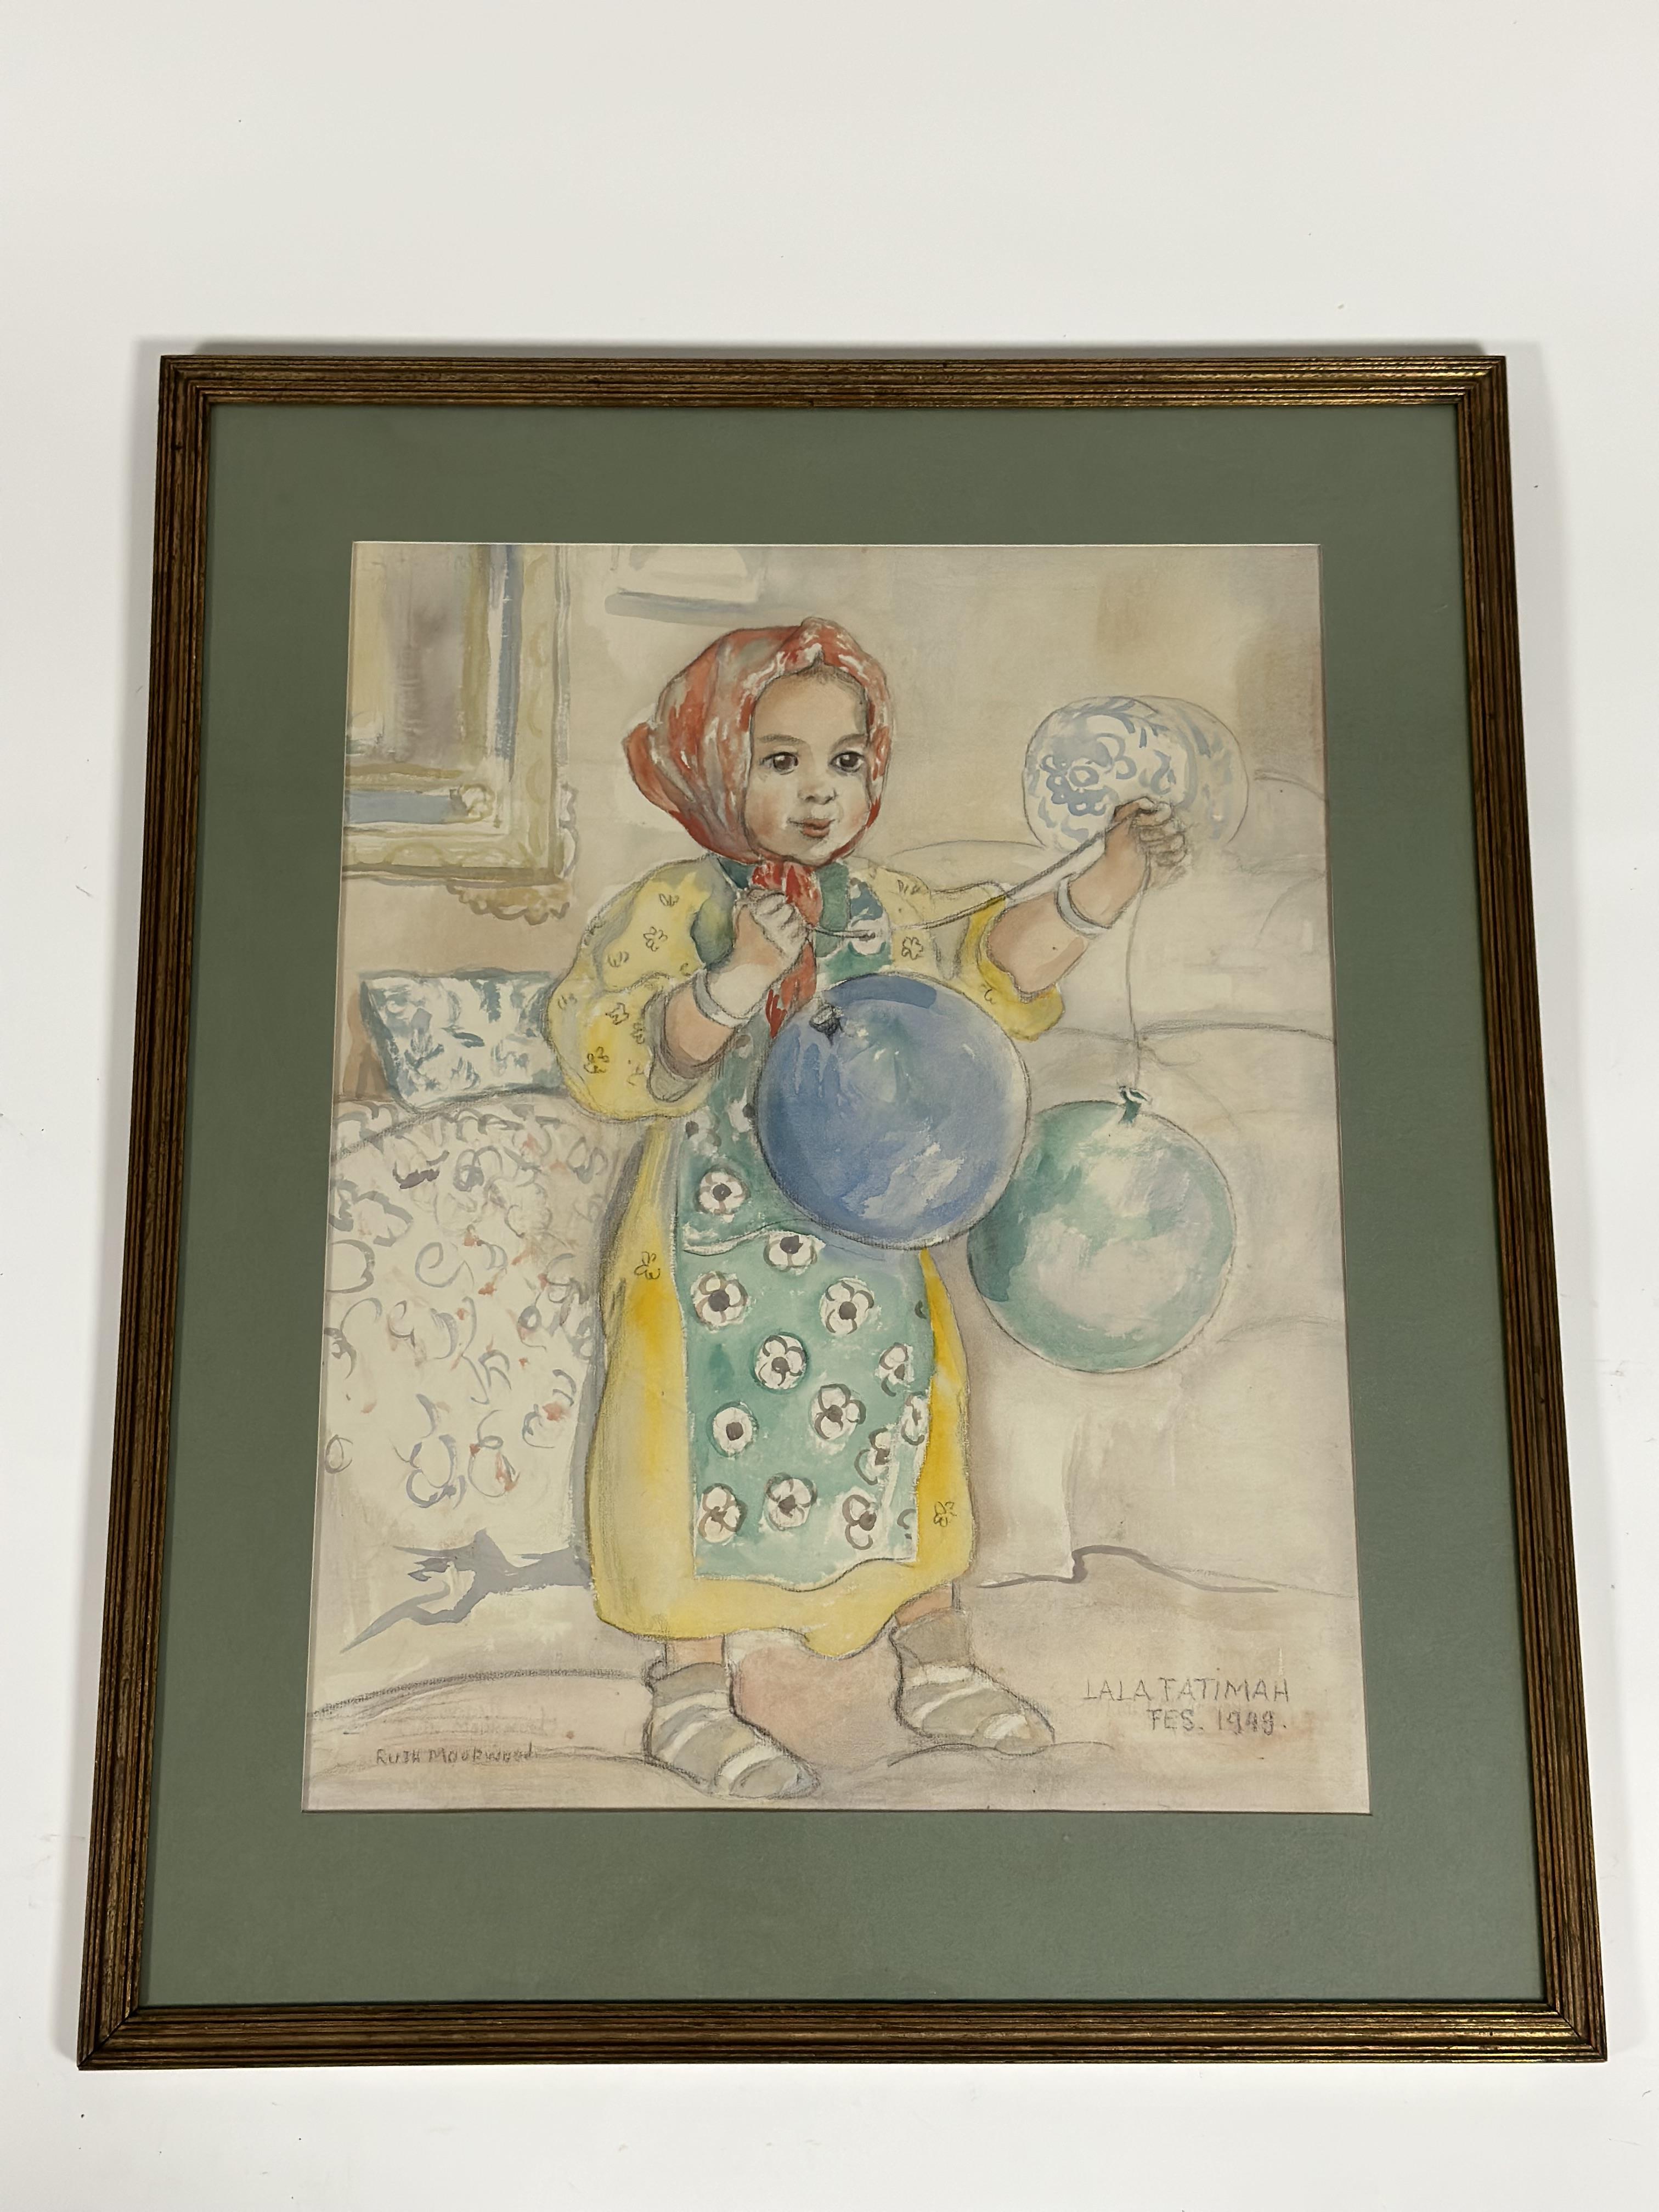 Ruth Moorwood (Scottish, exh. 1927-37), "Lala Fatimah", portrait of a young girl with balloons, - Image 2 of 3